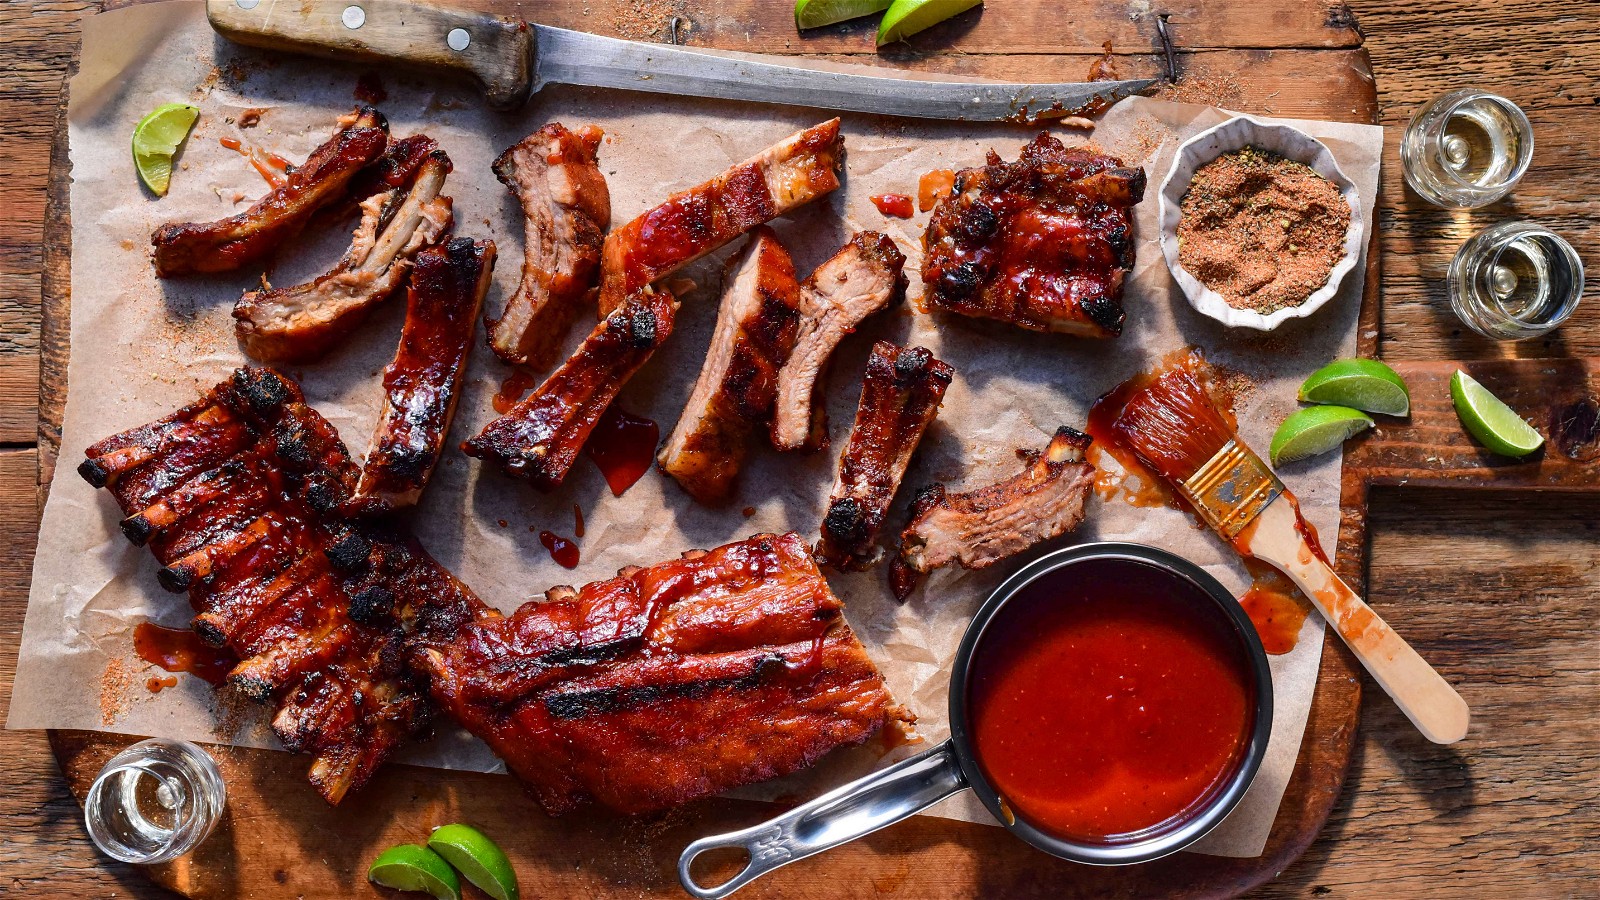 Image of Tequila-Lime BBQ Ribs